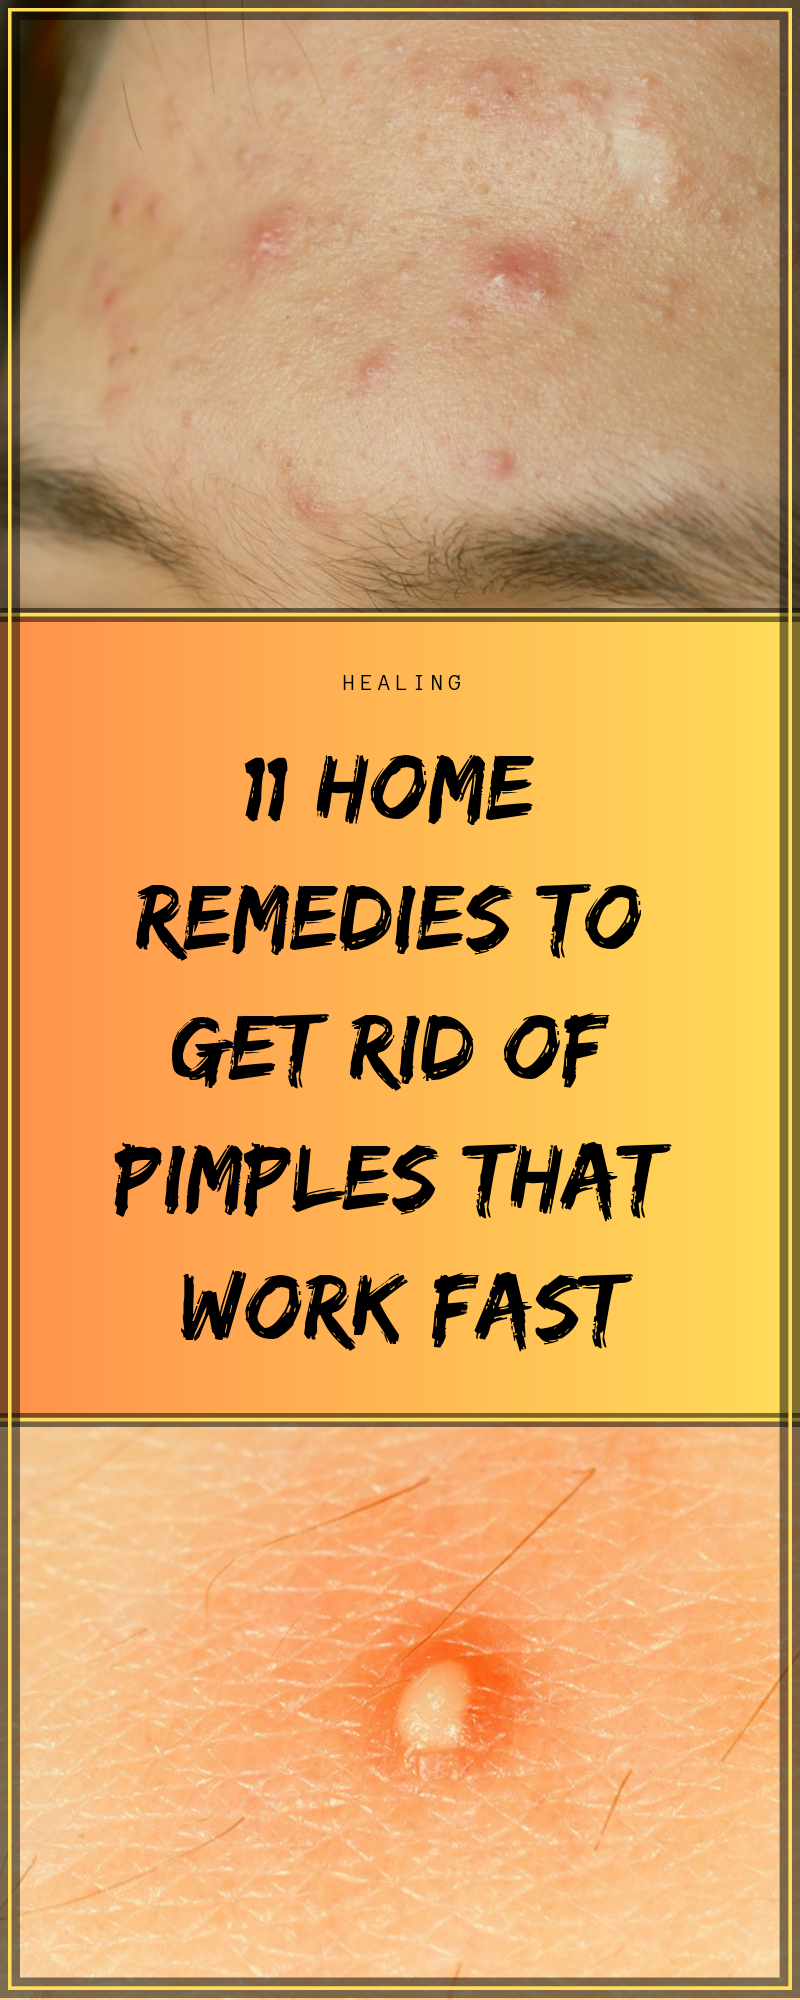 11 Home Remedies To Get Rid Of Pimples That Work Fast -   18 makeup Beauty remedies ideas